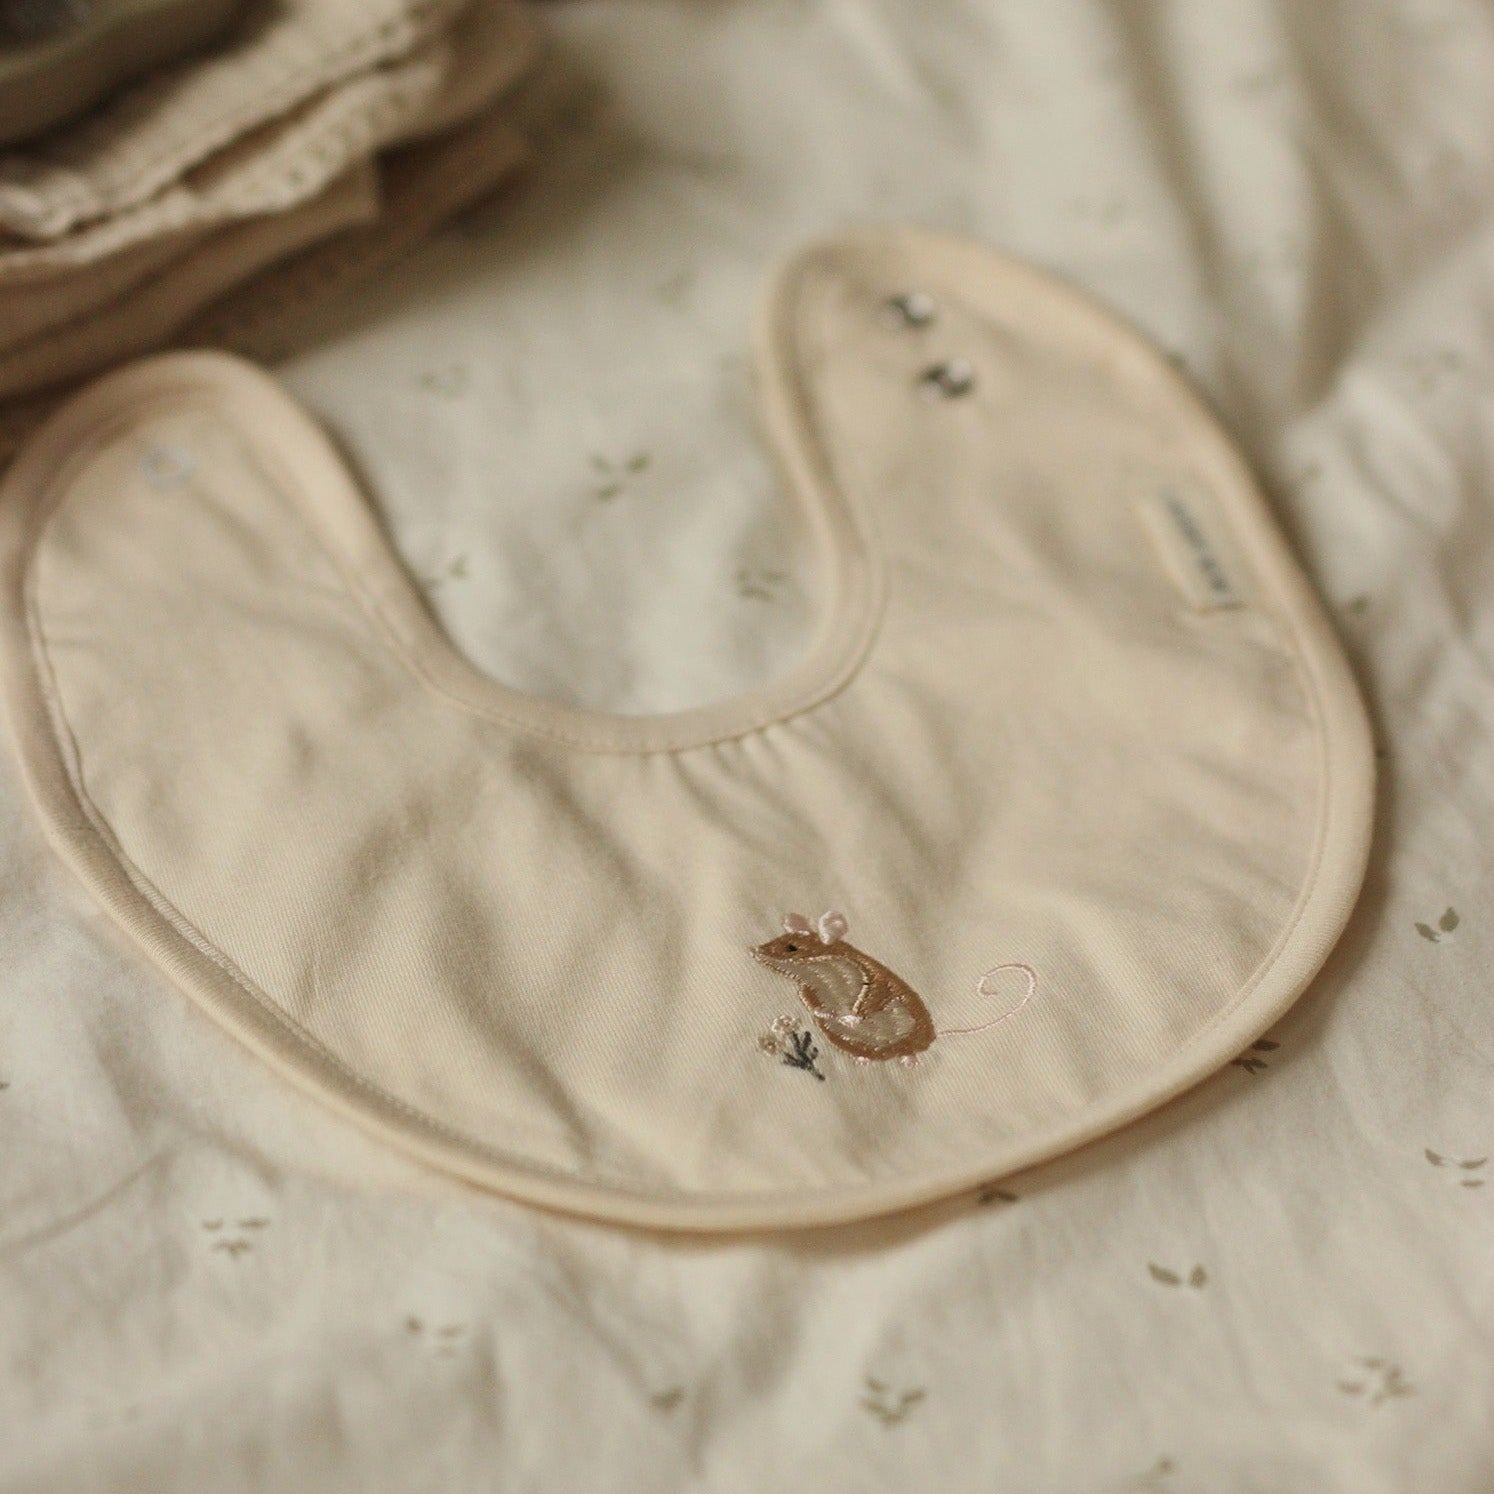 Avery Row Embroidered Cotton Bib - Mouse